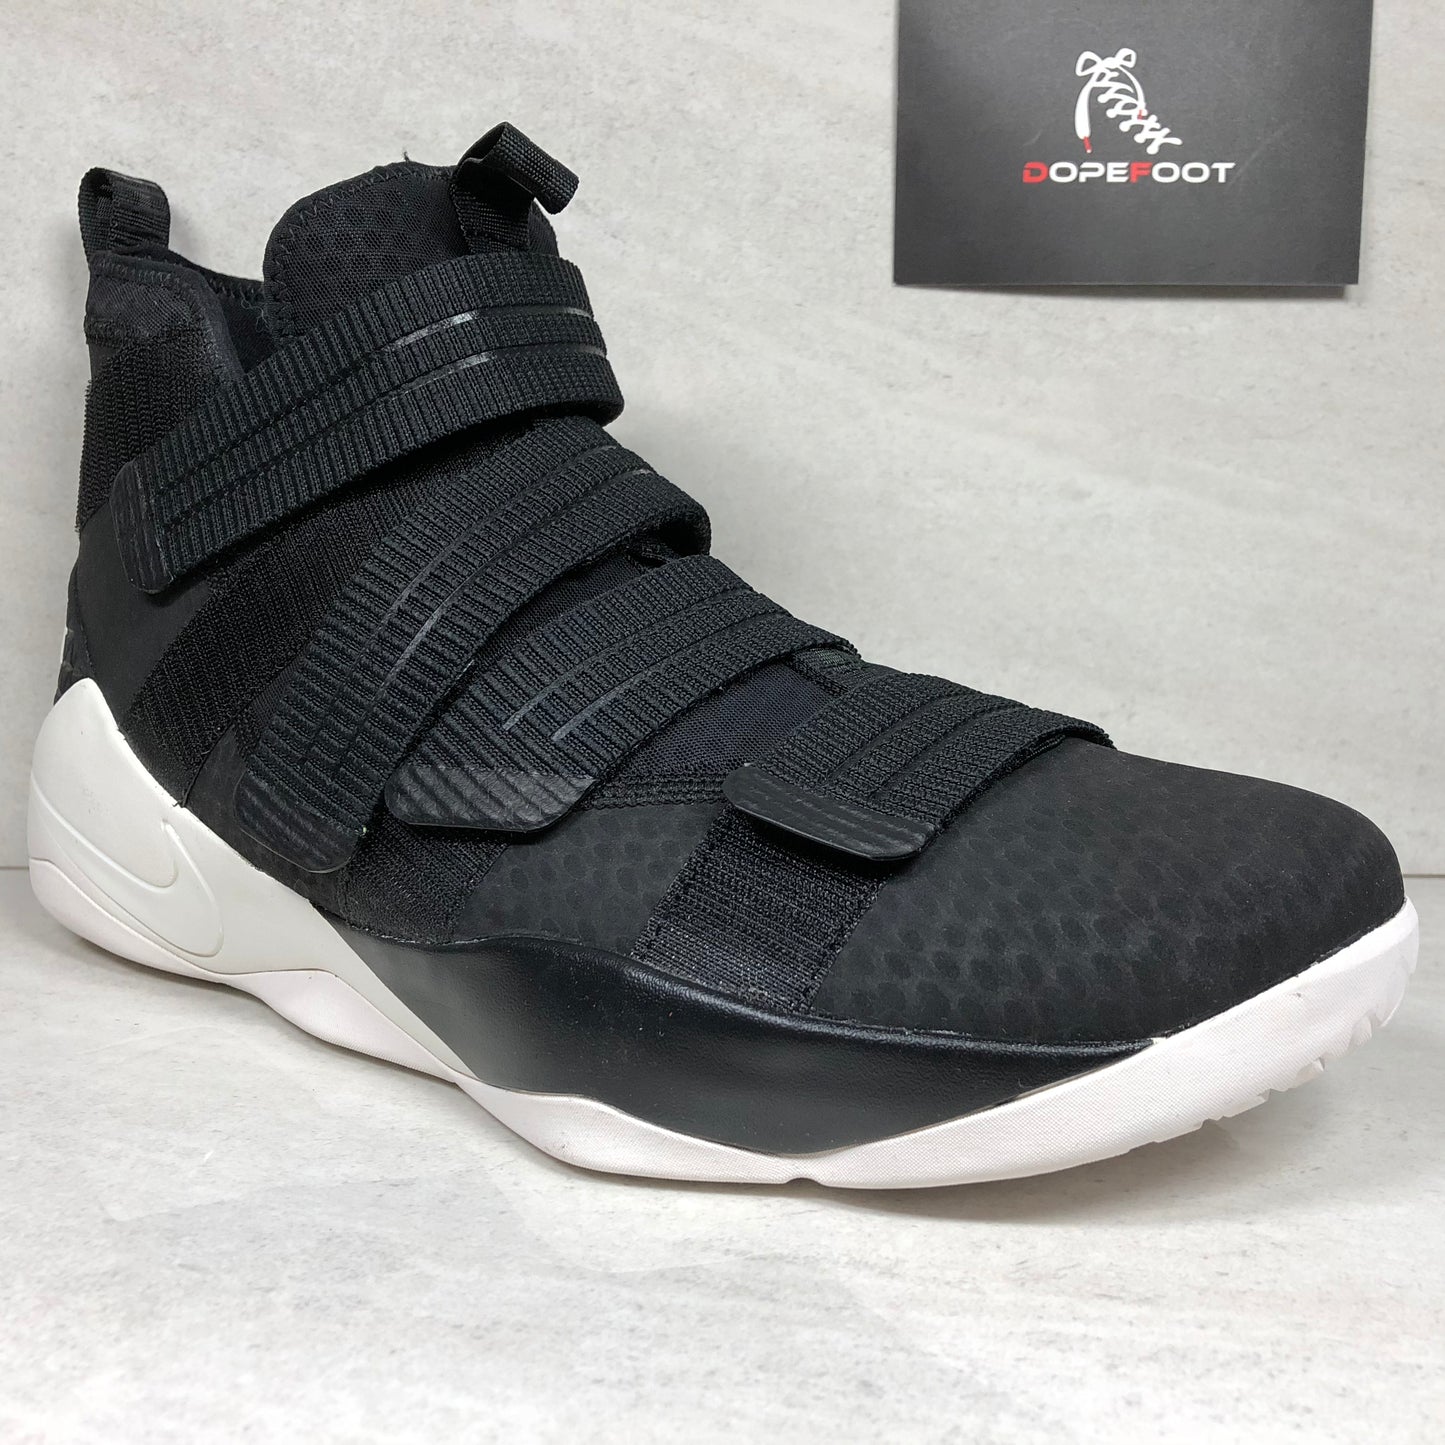 DS Nike Lebron Soldier 11 XI SFG Size 13 Black 897646 004